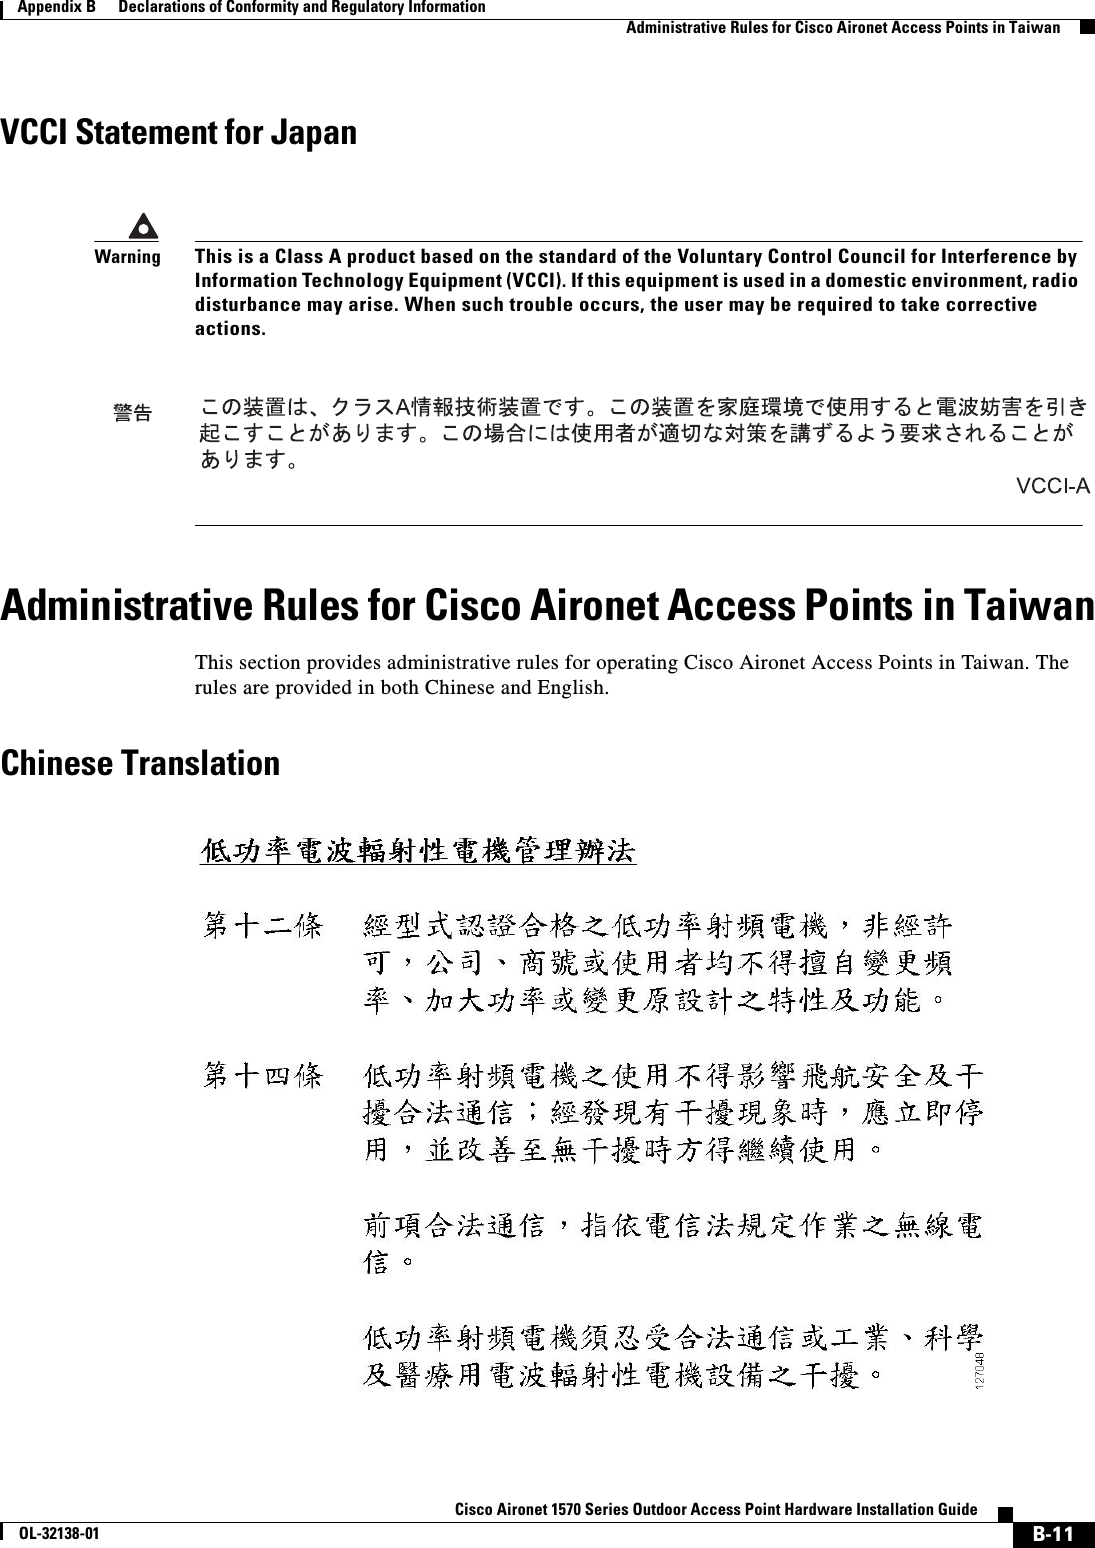  B-11Cisco Aironet 1570 Series Outdoor Access Point Hardware Installation GuideOL-32138-01Appendix B      Declarations of Conformity and Regulatory InformationAdministrative Rules for Cisco Aironet Access Points in TaiwanVCCI Statement for JapanAdministrative Rules for Cisco Aironet Access Points in TaiwanThis section provides administrative rules for operating Cisco Aironet Access Points in Taiwan. The rules are provided in both Chinese and English.Chinese TranslationWarningThis is a Class A product based on the standard of the Voluntary Control Council for Interference by Information Technology Equipment (VCCI). If this equipment is used in a domestic environment, radio disturbance may arise. When such trouble occurs, the user may be required to take corrective actions.